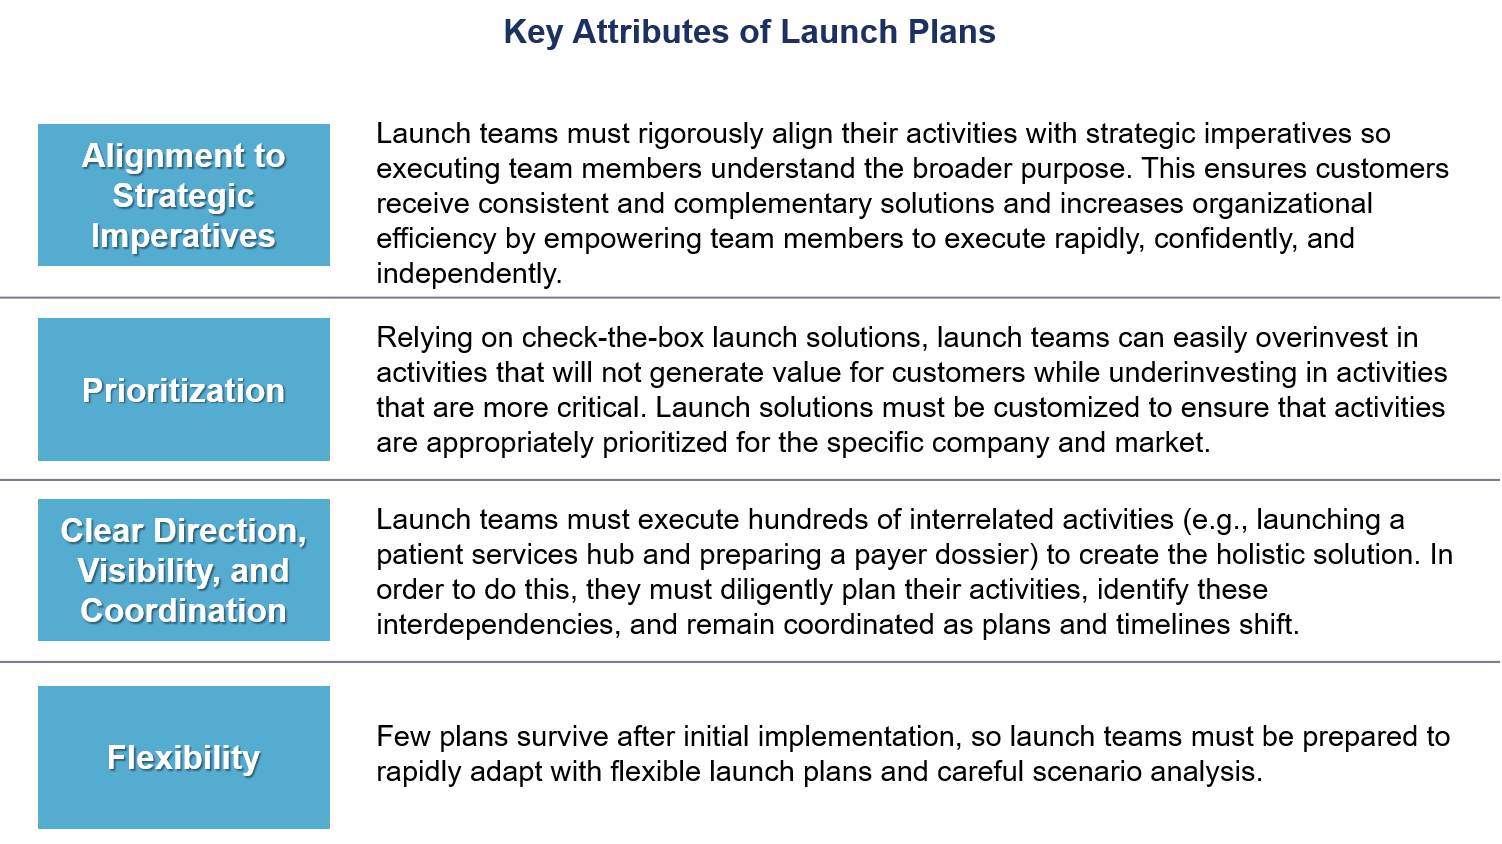 launch-plan-attributes.png